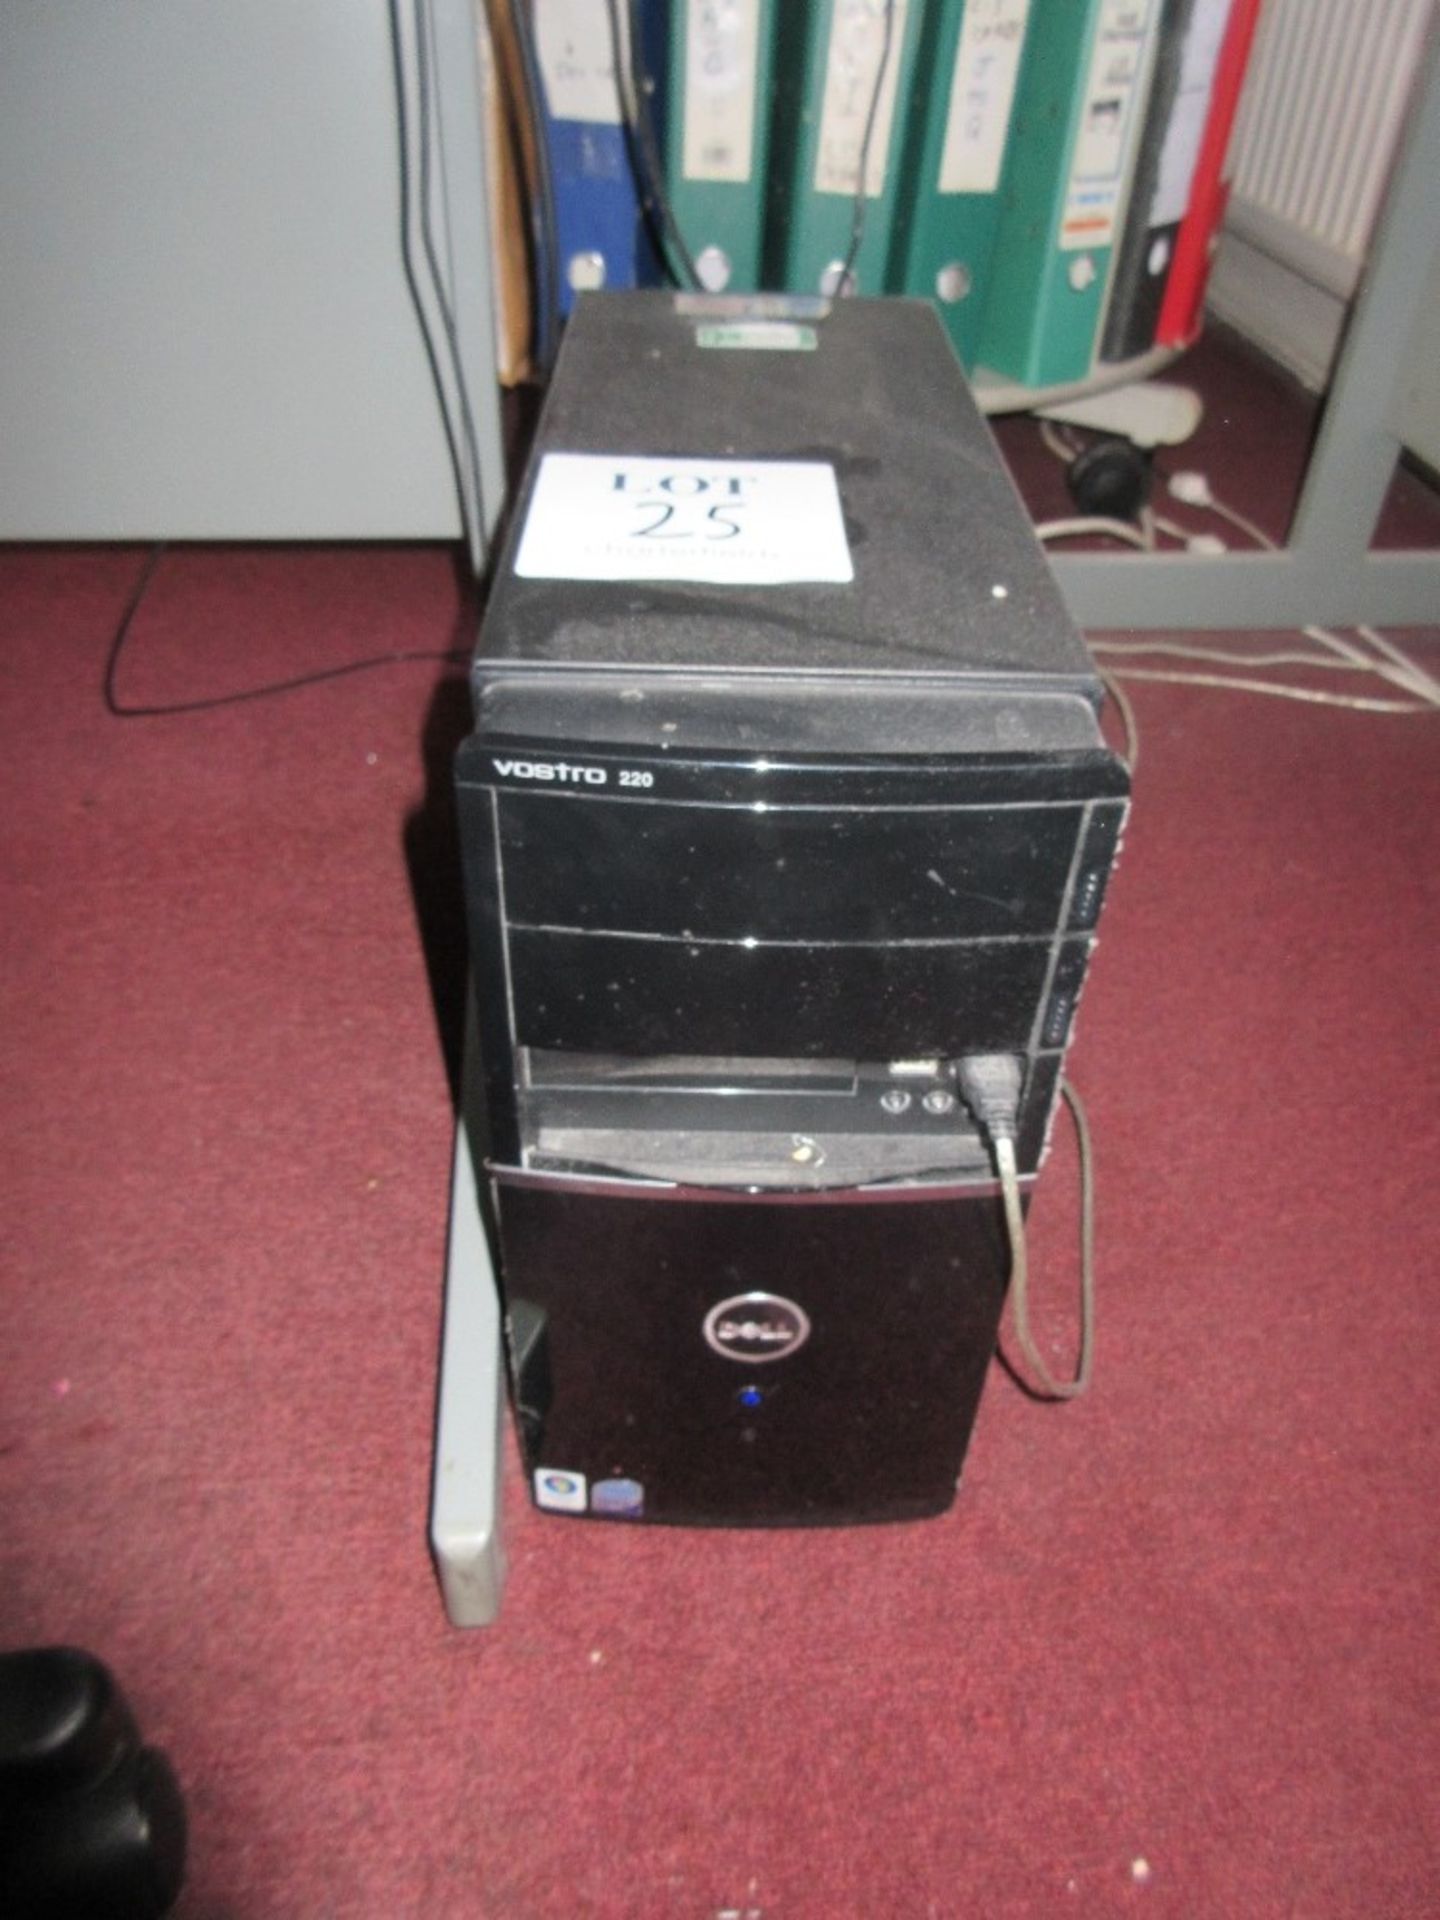 Dell Vostro 220 mini tower PC with flat screen monitor, keyboard and mouse incorporating Core 2 duo